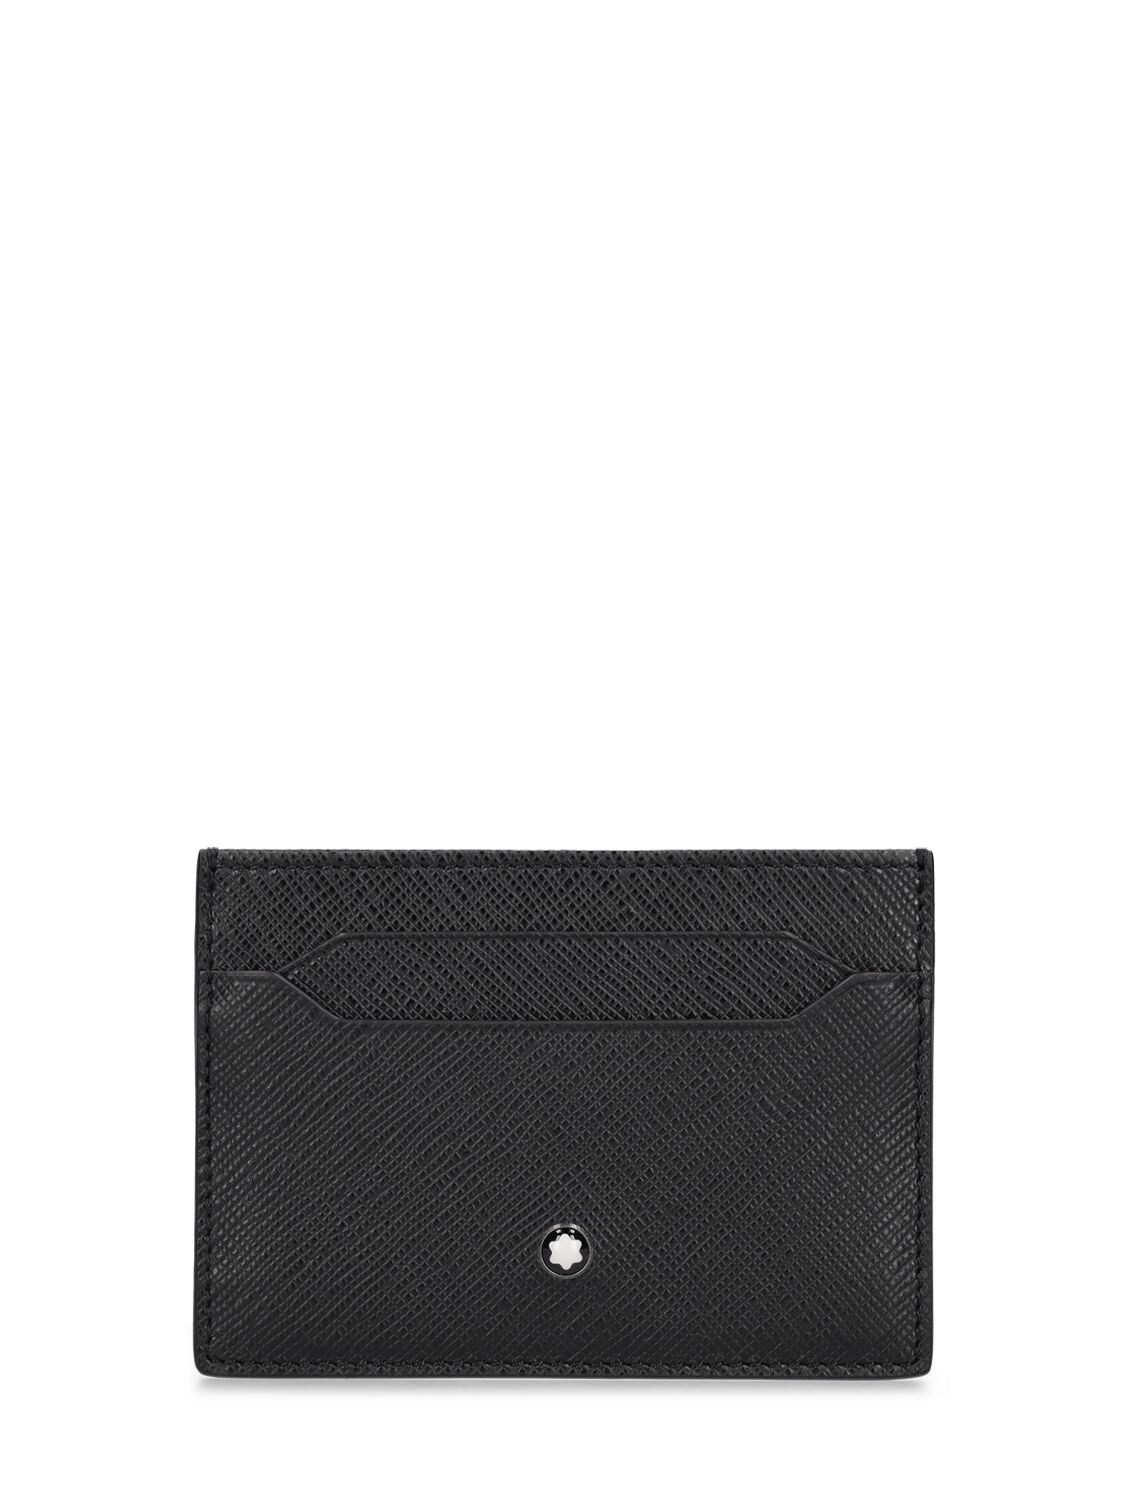 Montblanc Mb Sartorial Leather Card Holder In Black